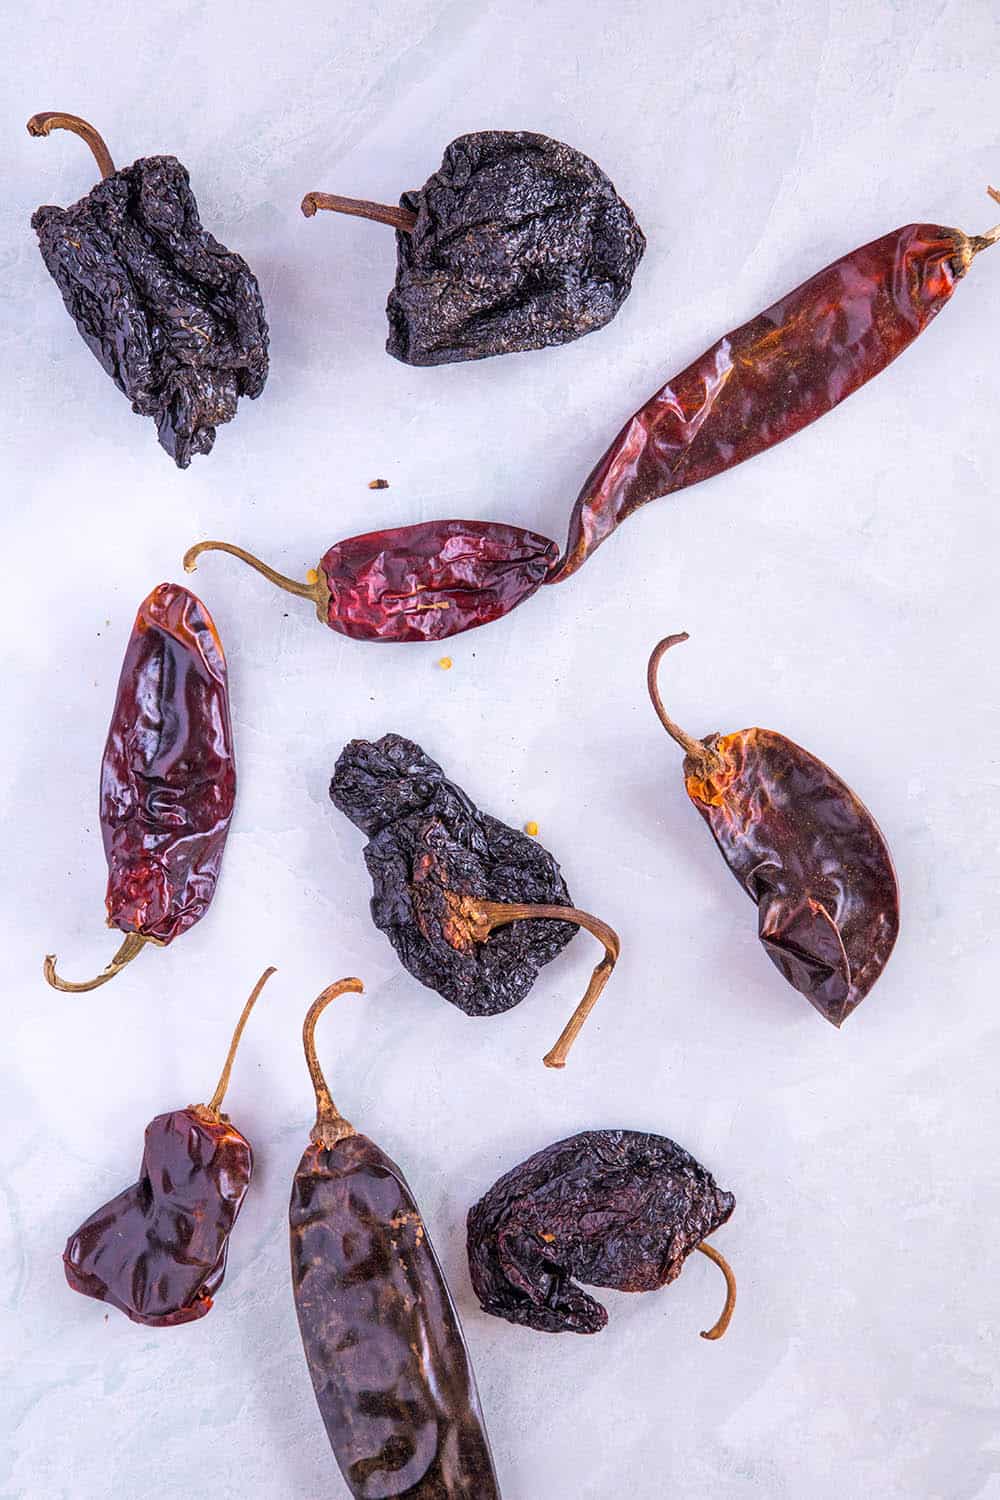 The chili peppers for our Texas chili